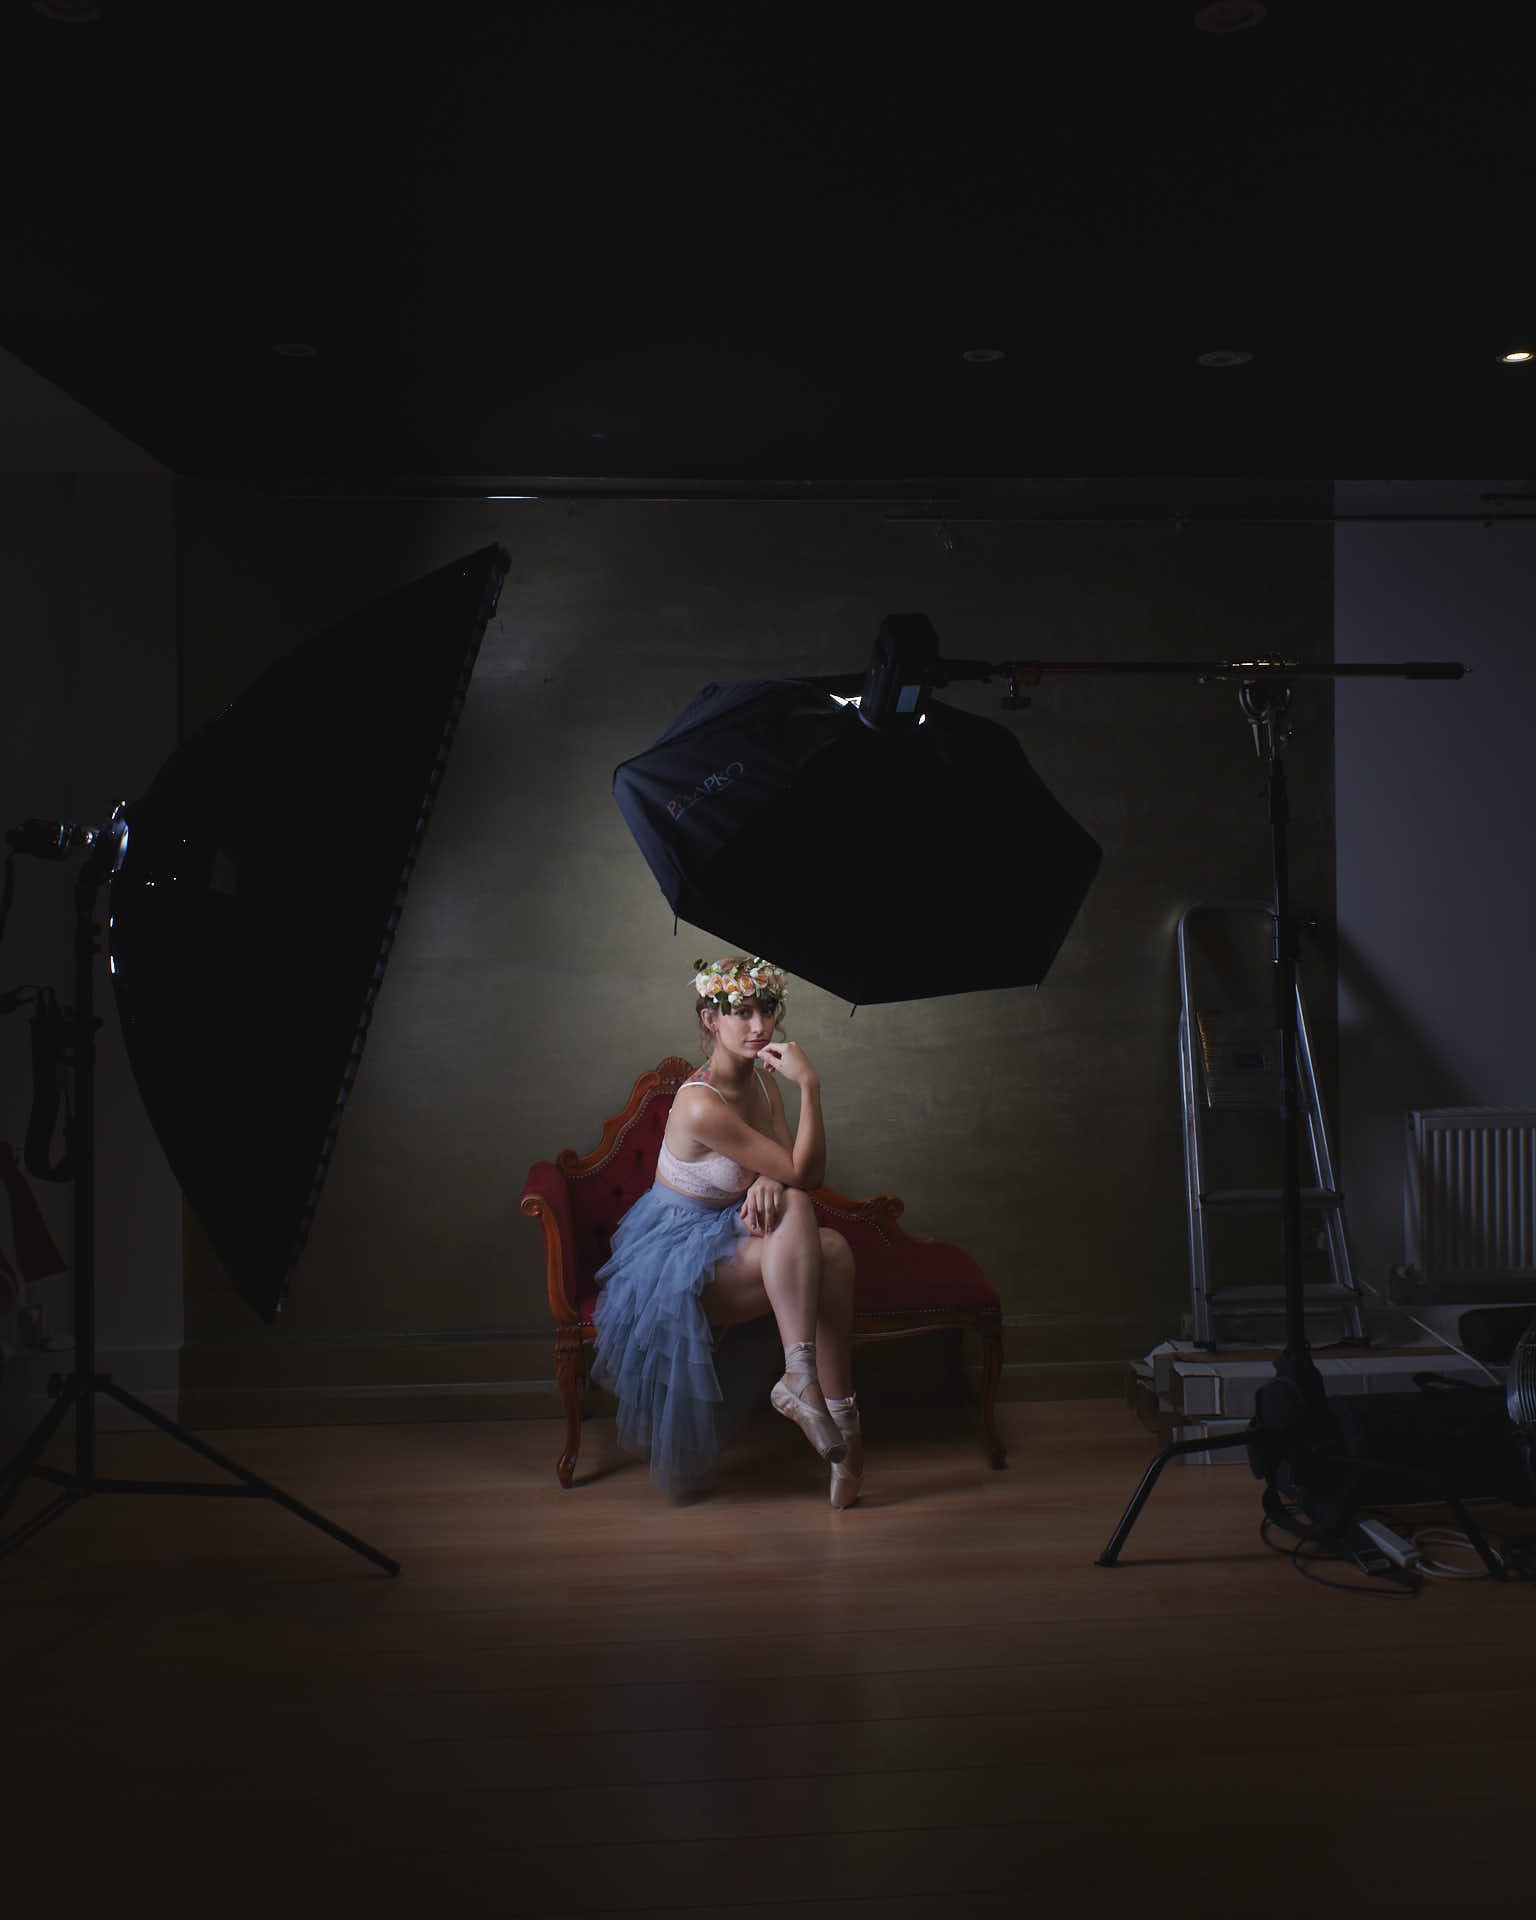 ballet dancer wearing a flower crown sitting on a Chaise lounge surrounded by studio lights